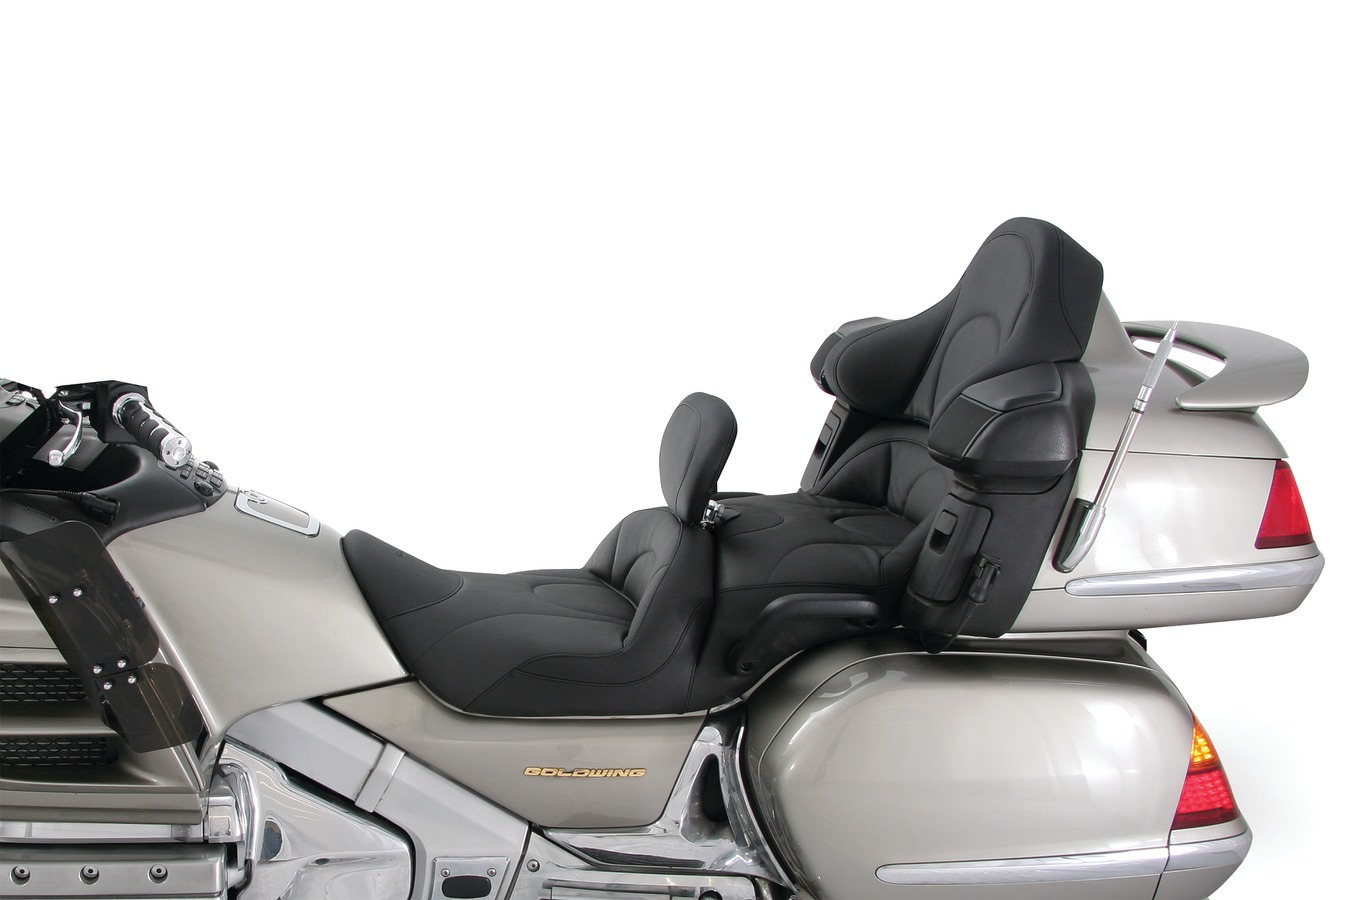 Standard Touring One-Piece Seat with Heat for Honda Gold Wing GL1800 2006-